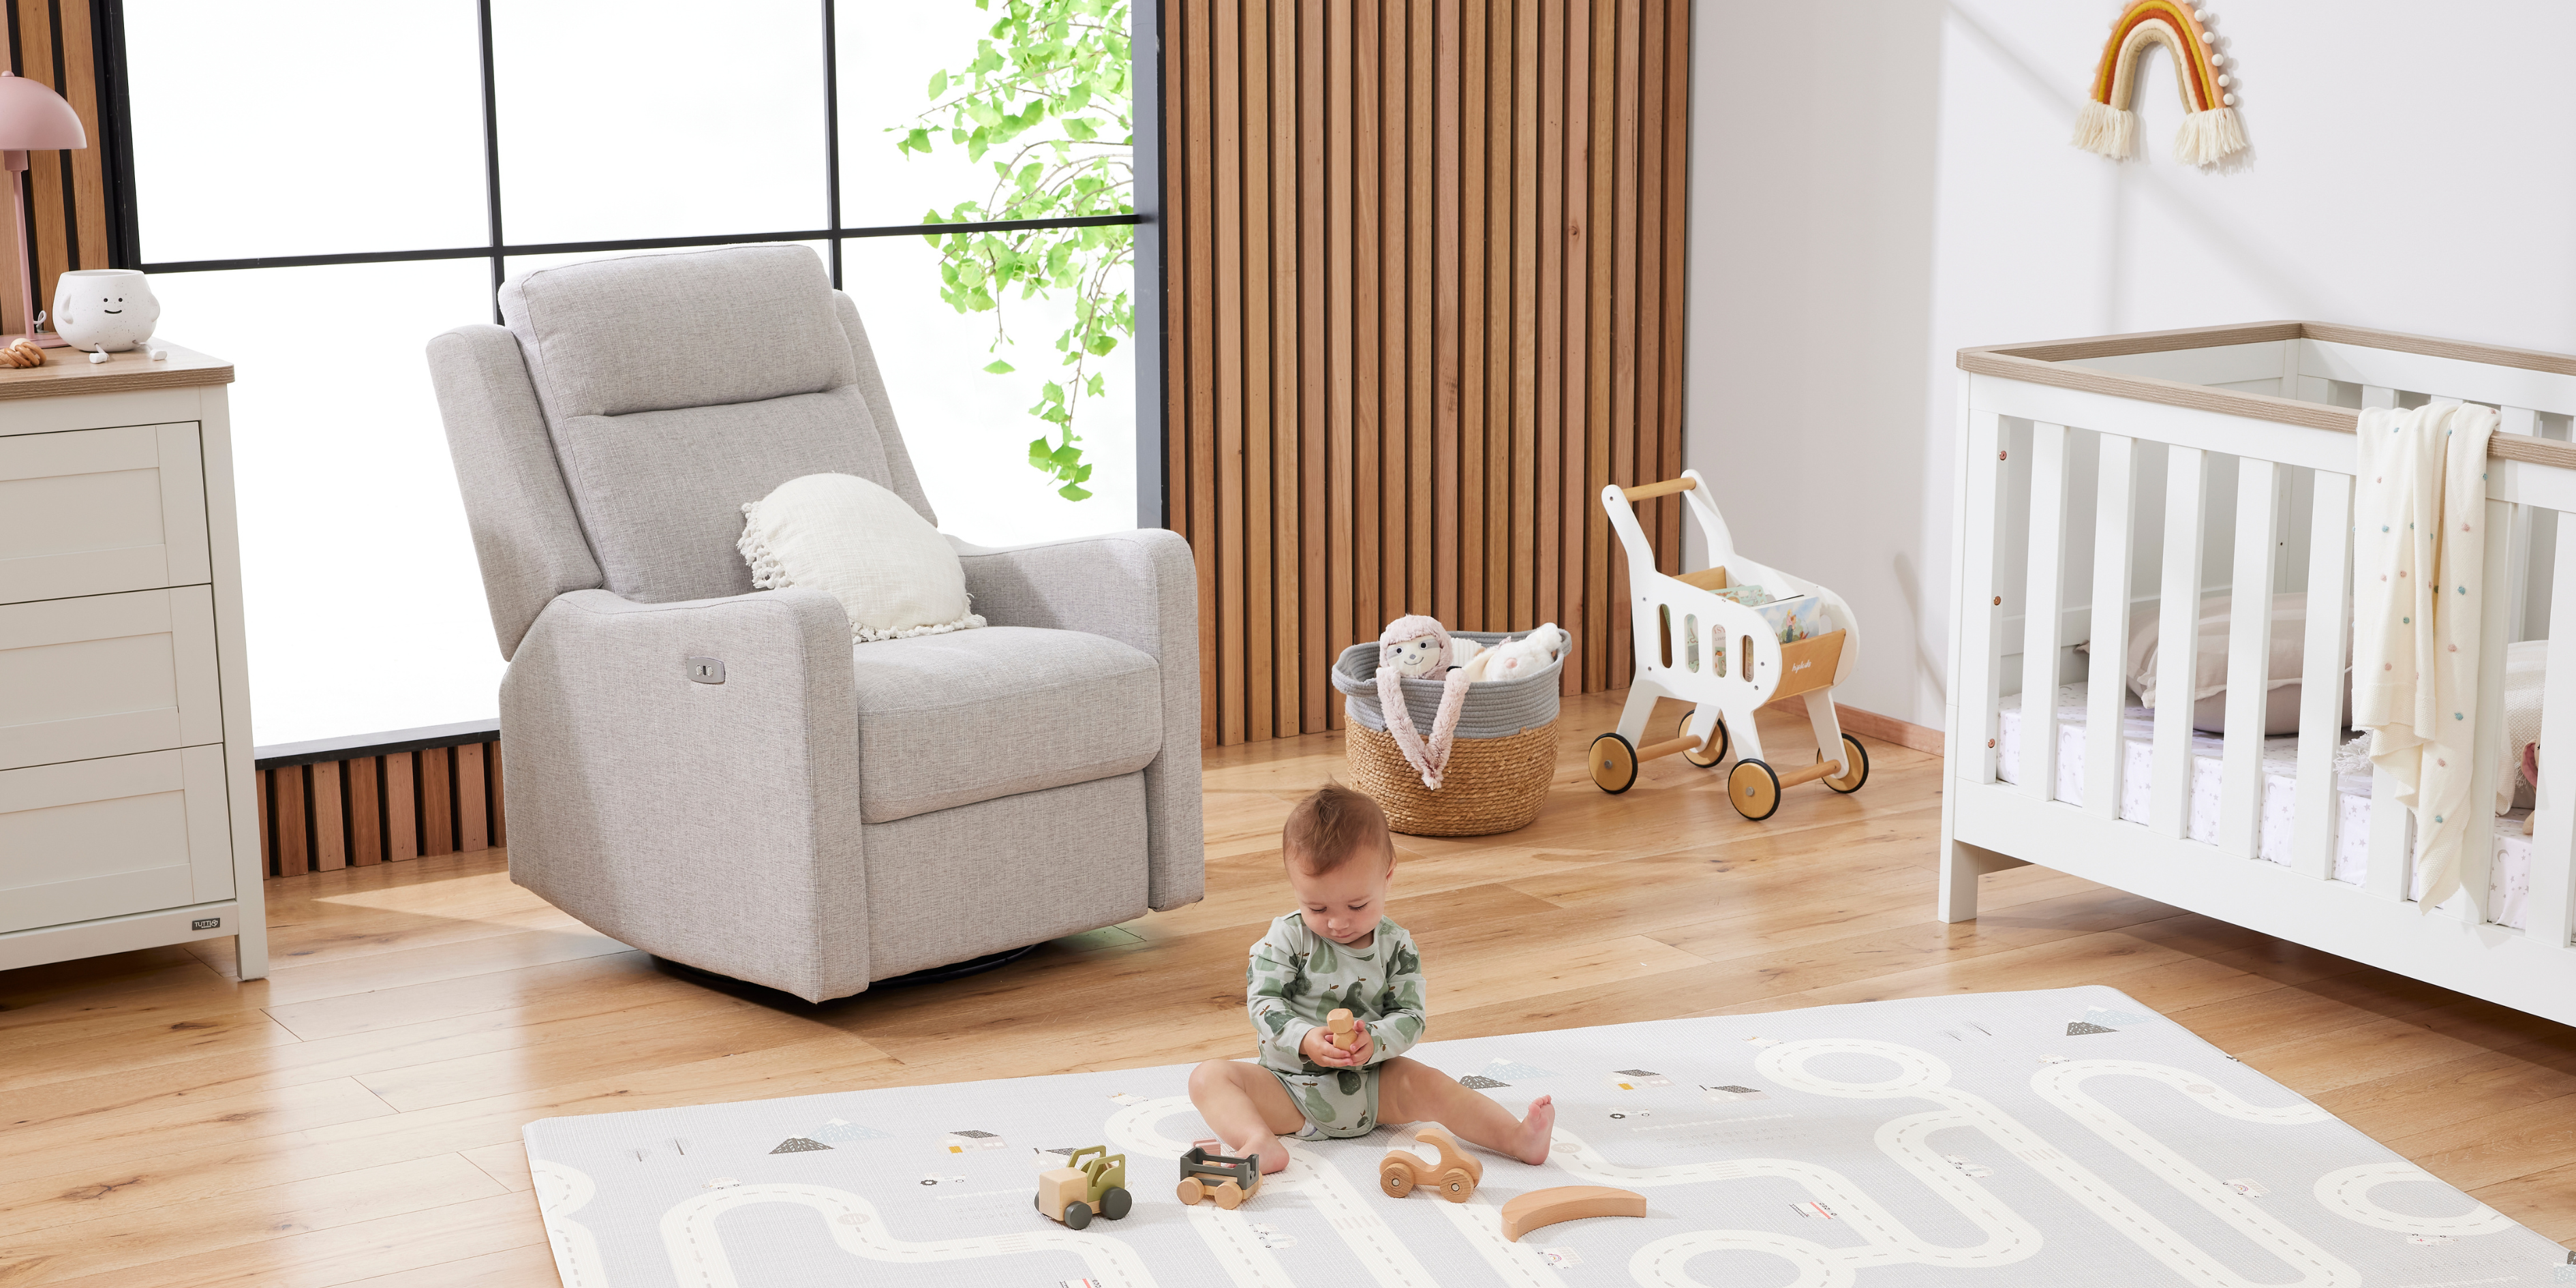 https://www.iltutto.com.au/collections/the-grey-nursery-trend